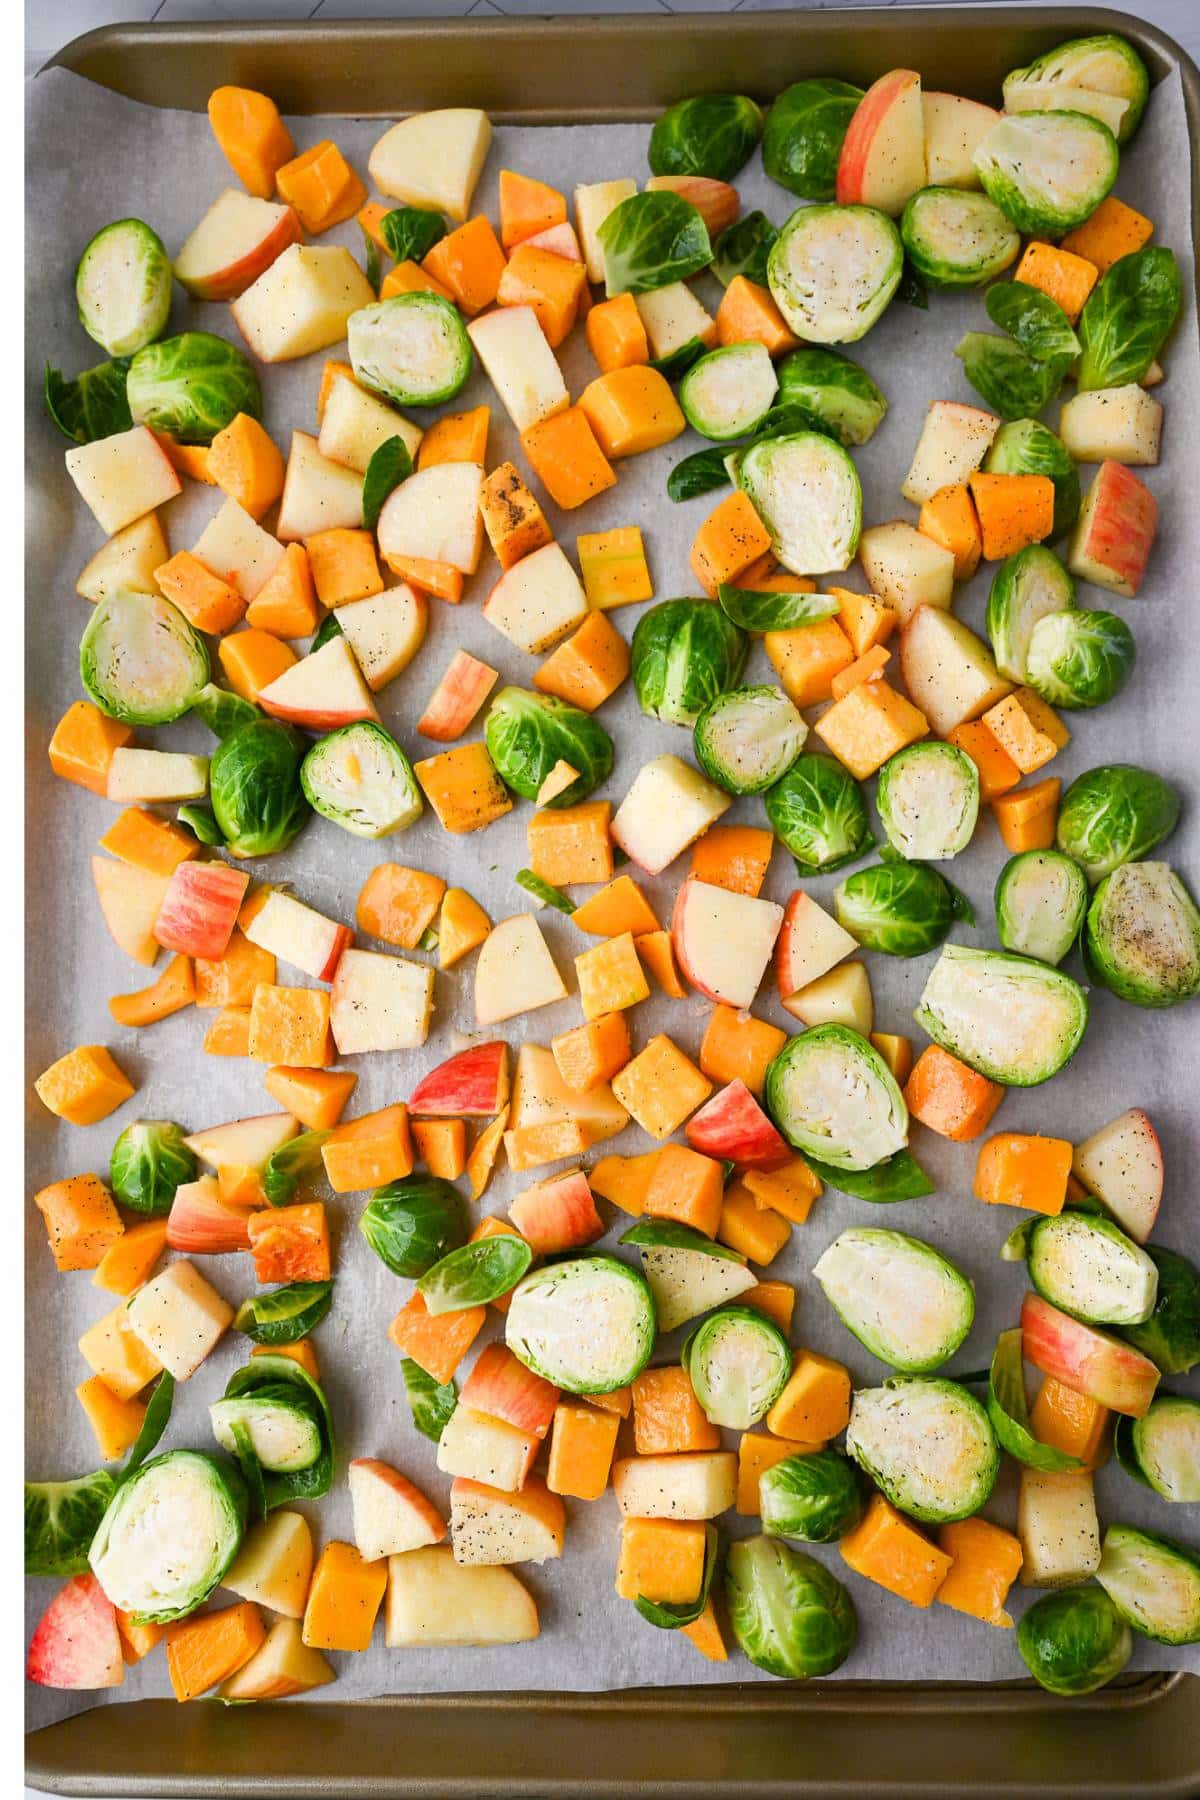 apples, brussels sprouts, and butternut squash spread out on a parchment lined baking sheet